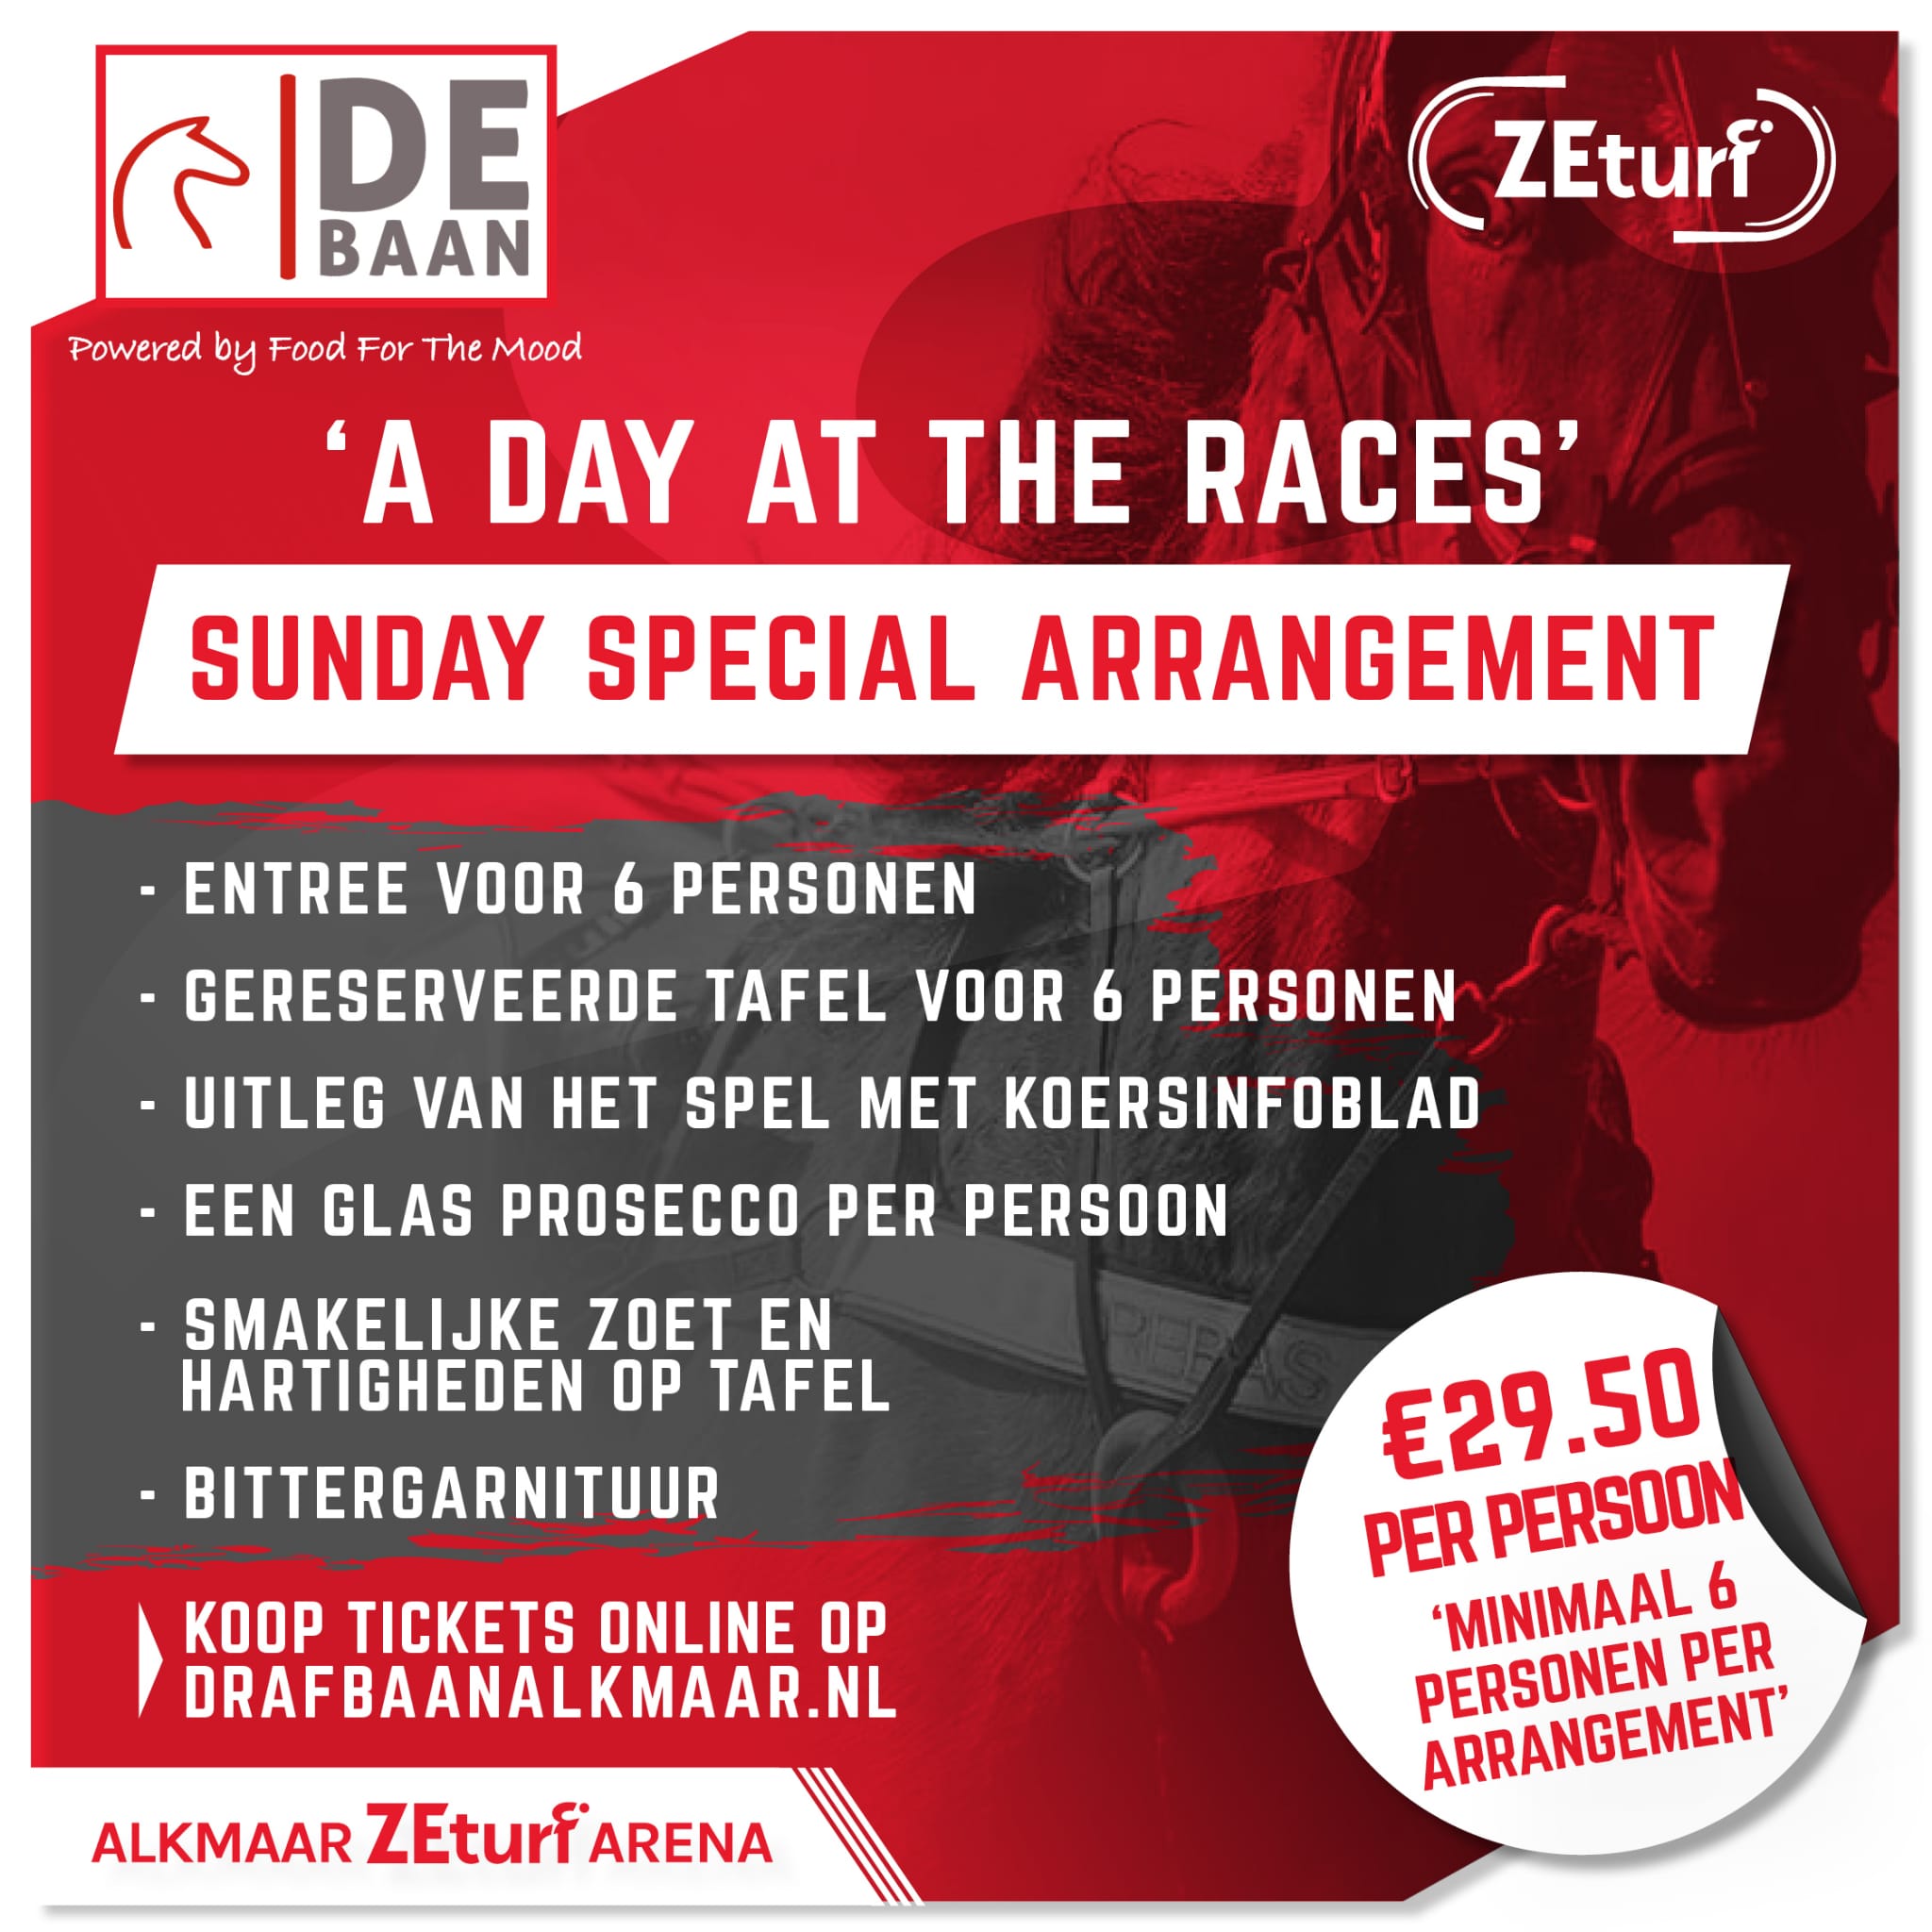 Sunday Special - A day at the races